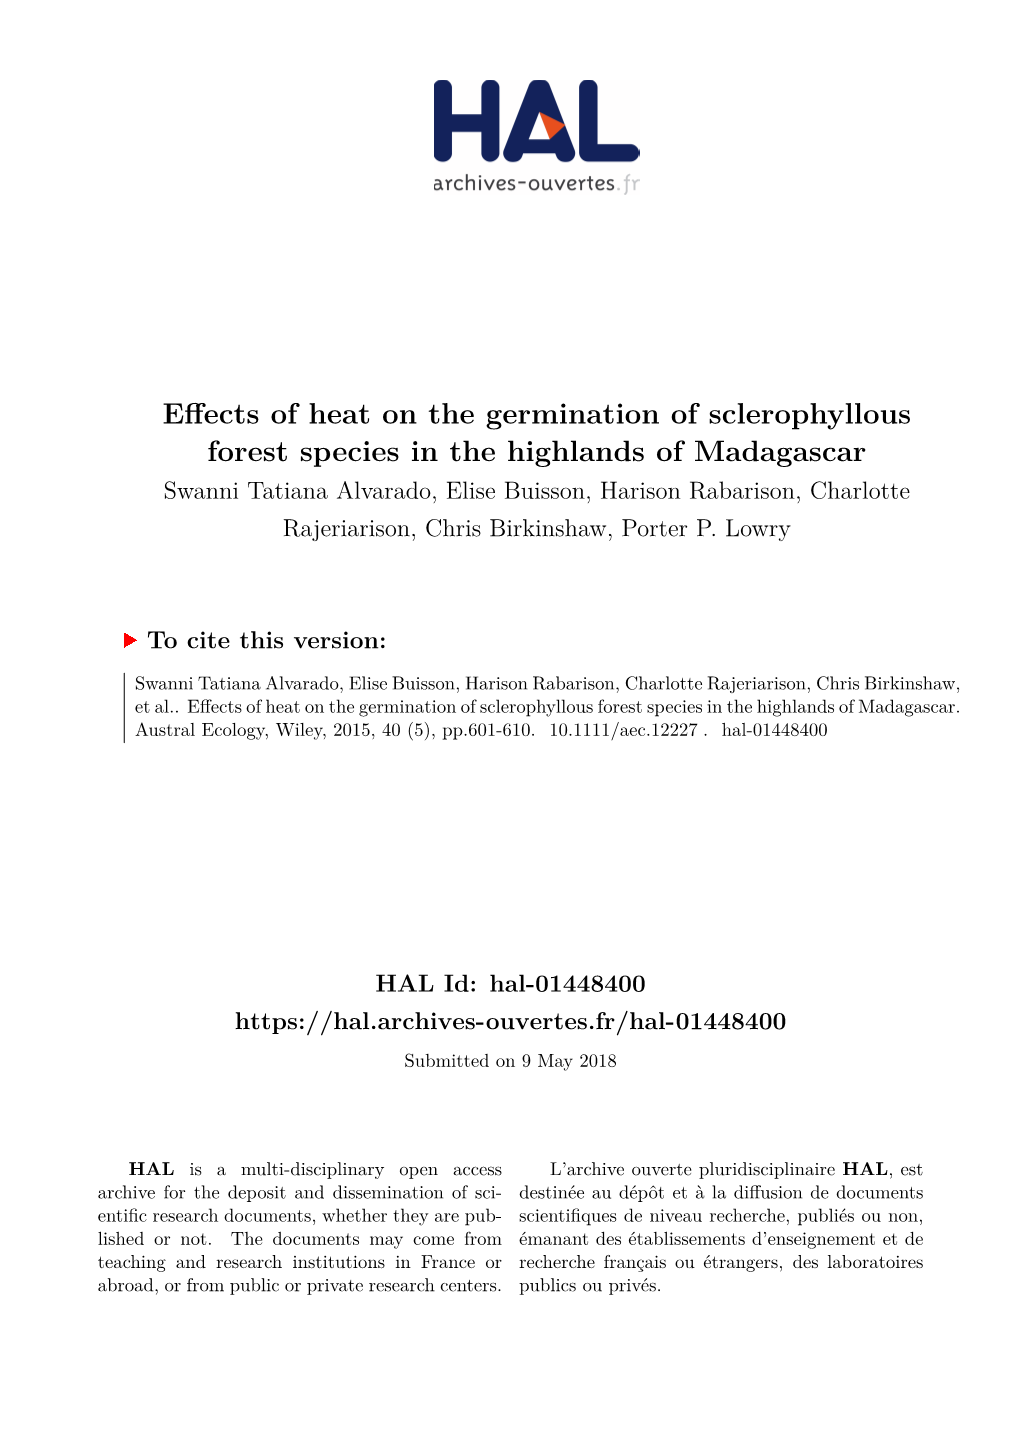 Effects of Heat on the Germination of Sclerophyllous Forest Species in the Highlands of Madagascar